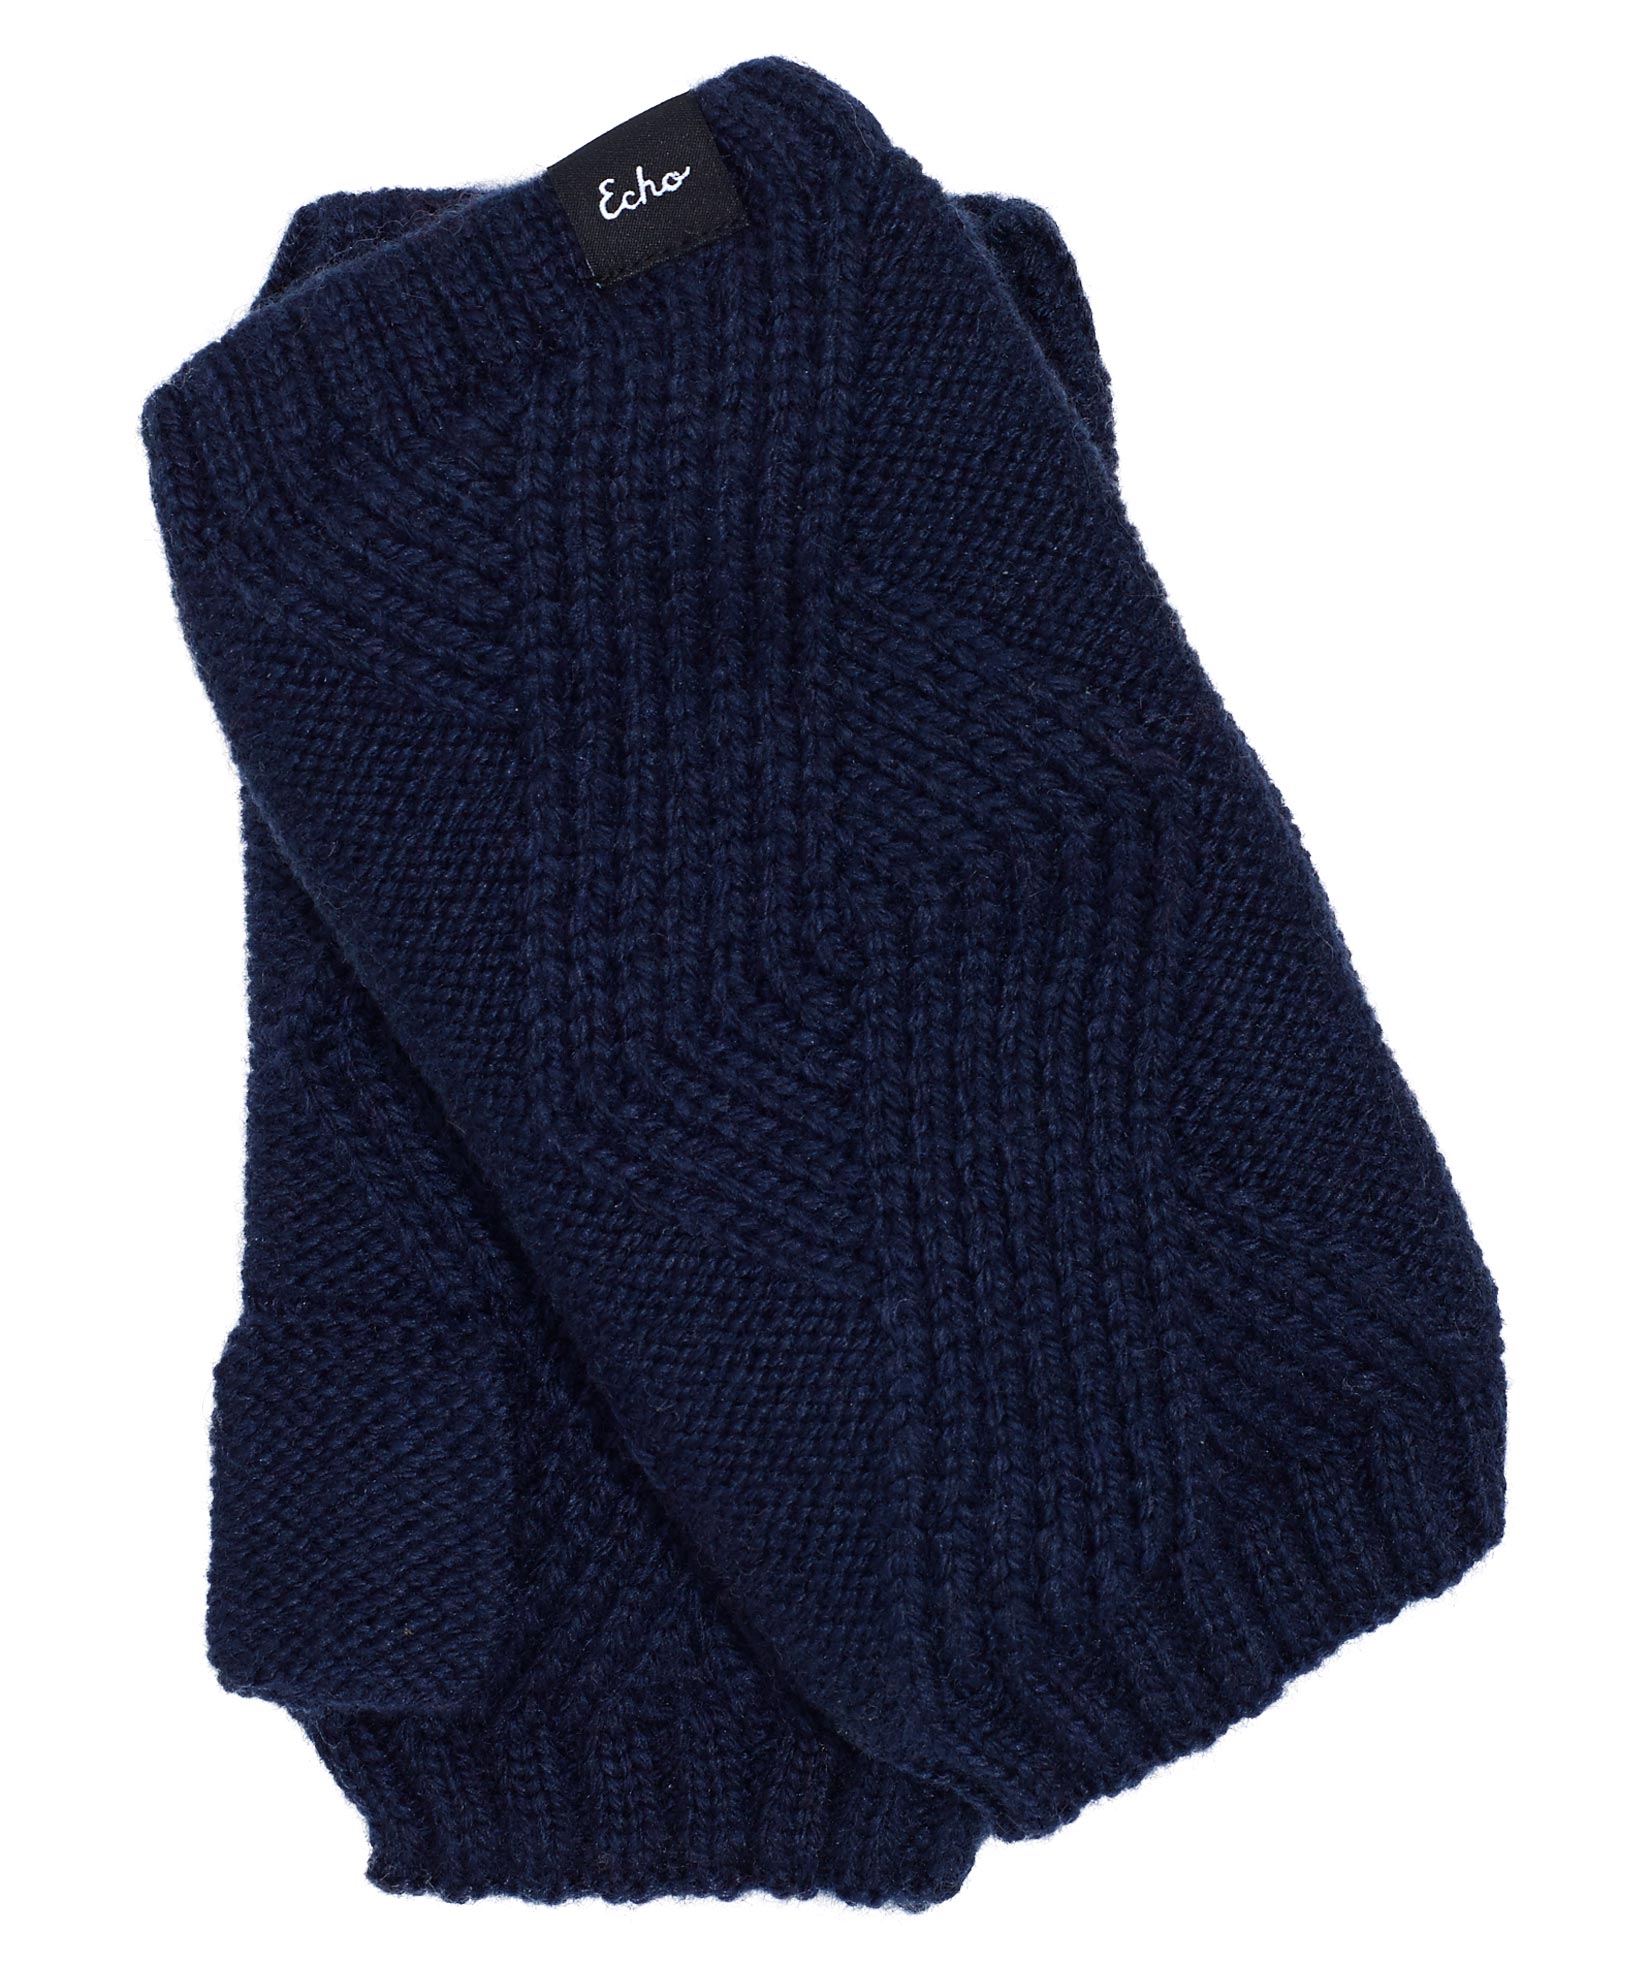 Recycled Cable Fingerless Glove in color Navy